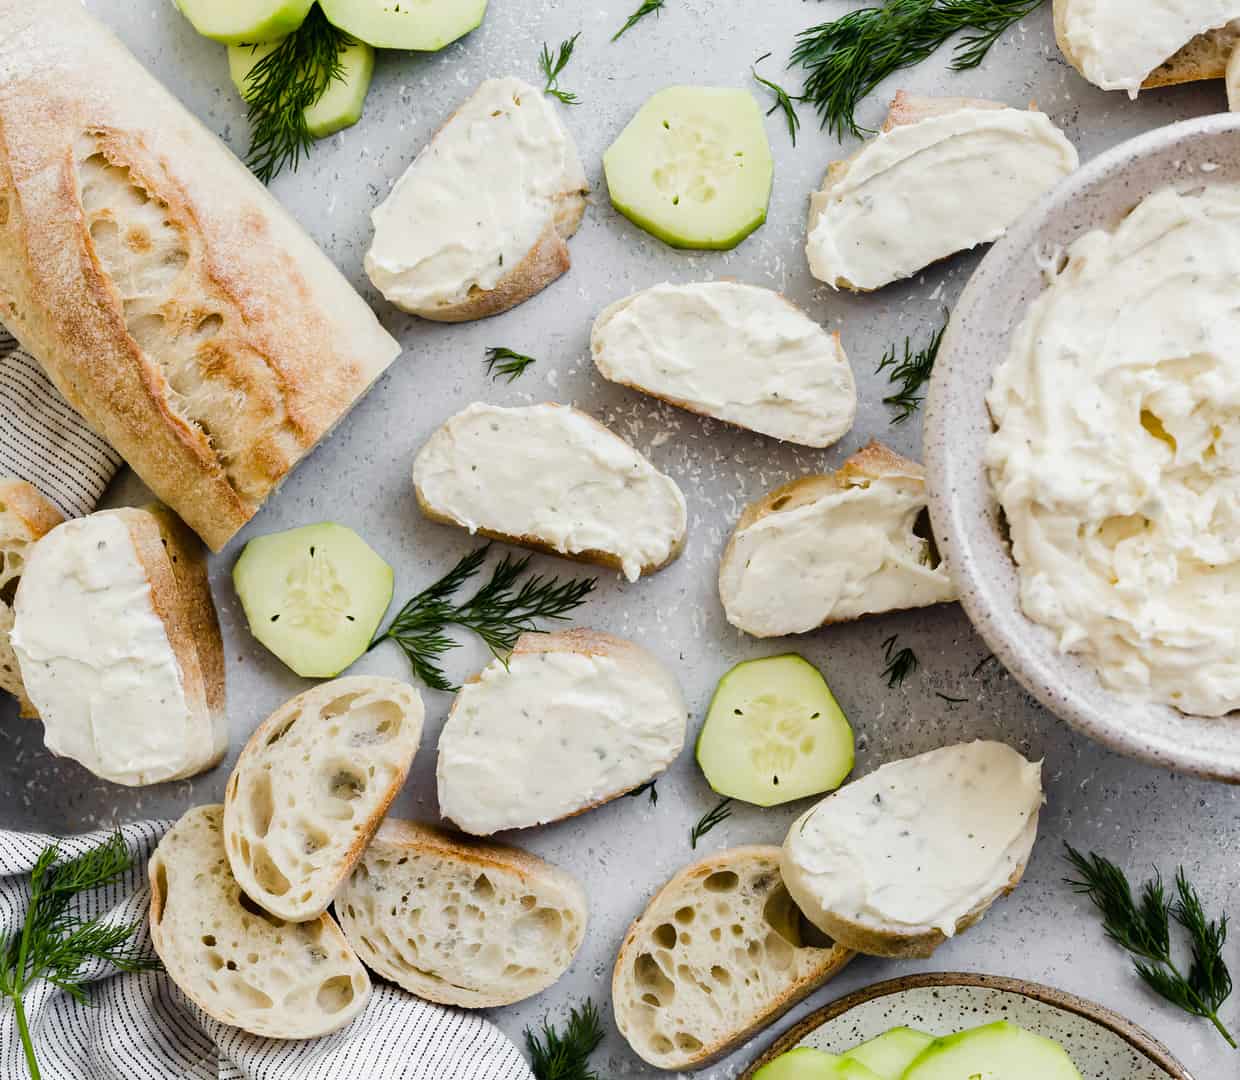 Ranch cream cheese mixture smeared atop sliced baguettes, with cucumbers in the background.